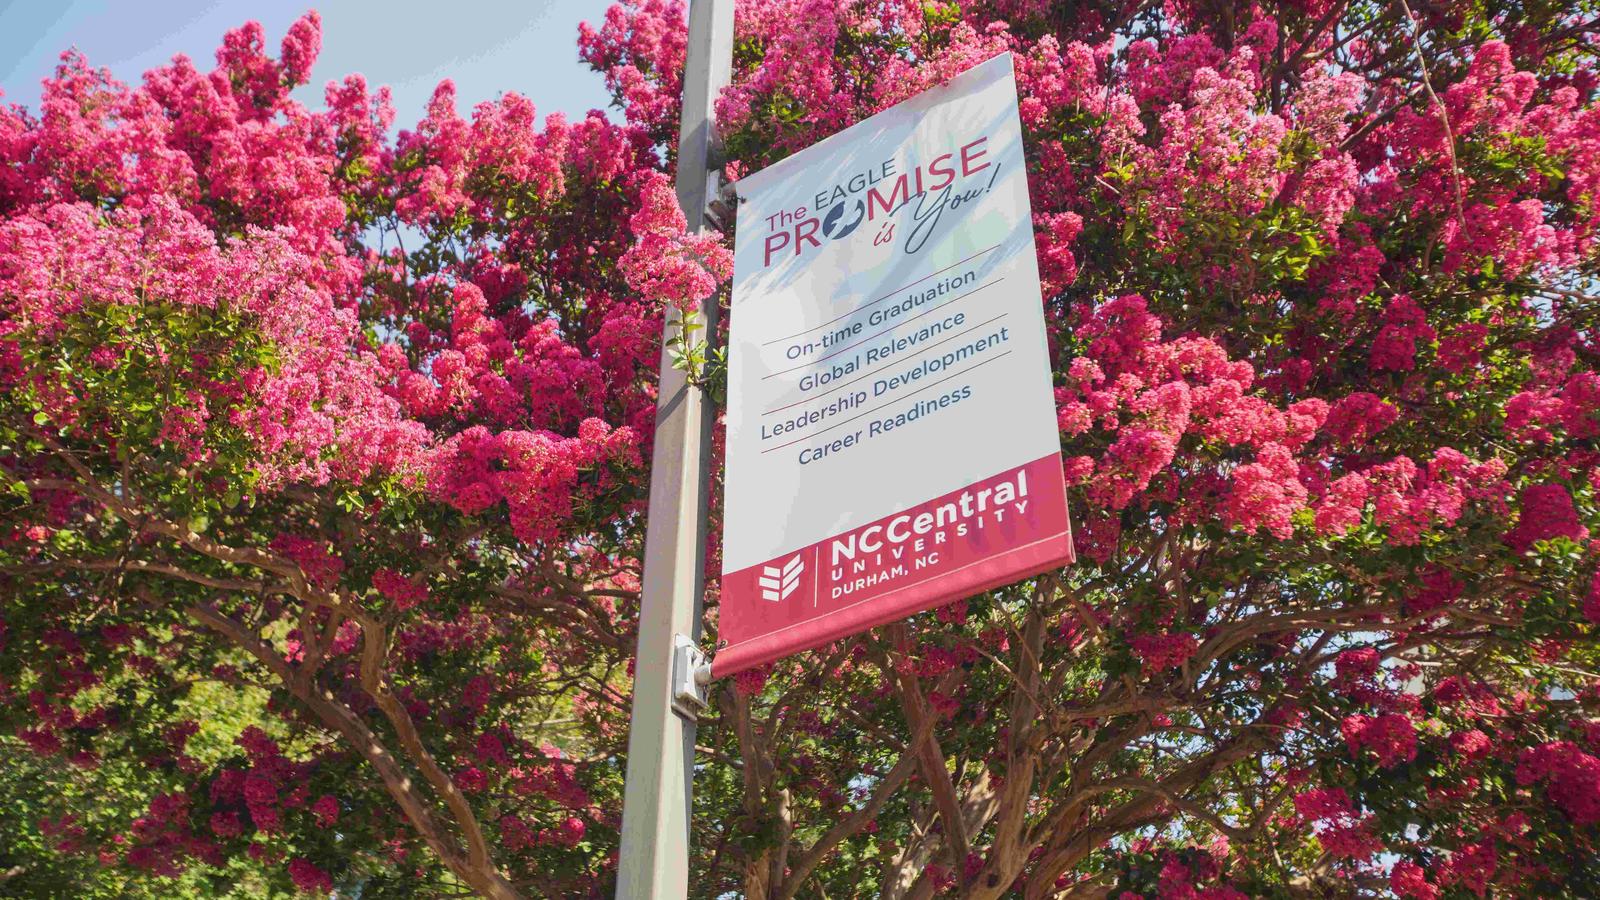 NCCU Banner in Spring. The banner states "The Eagle Promise is You!"